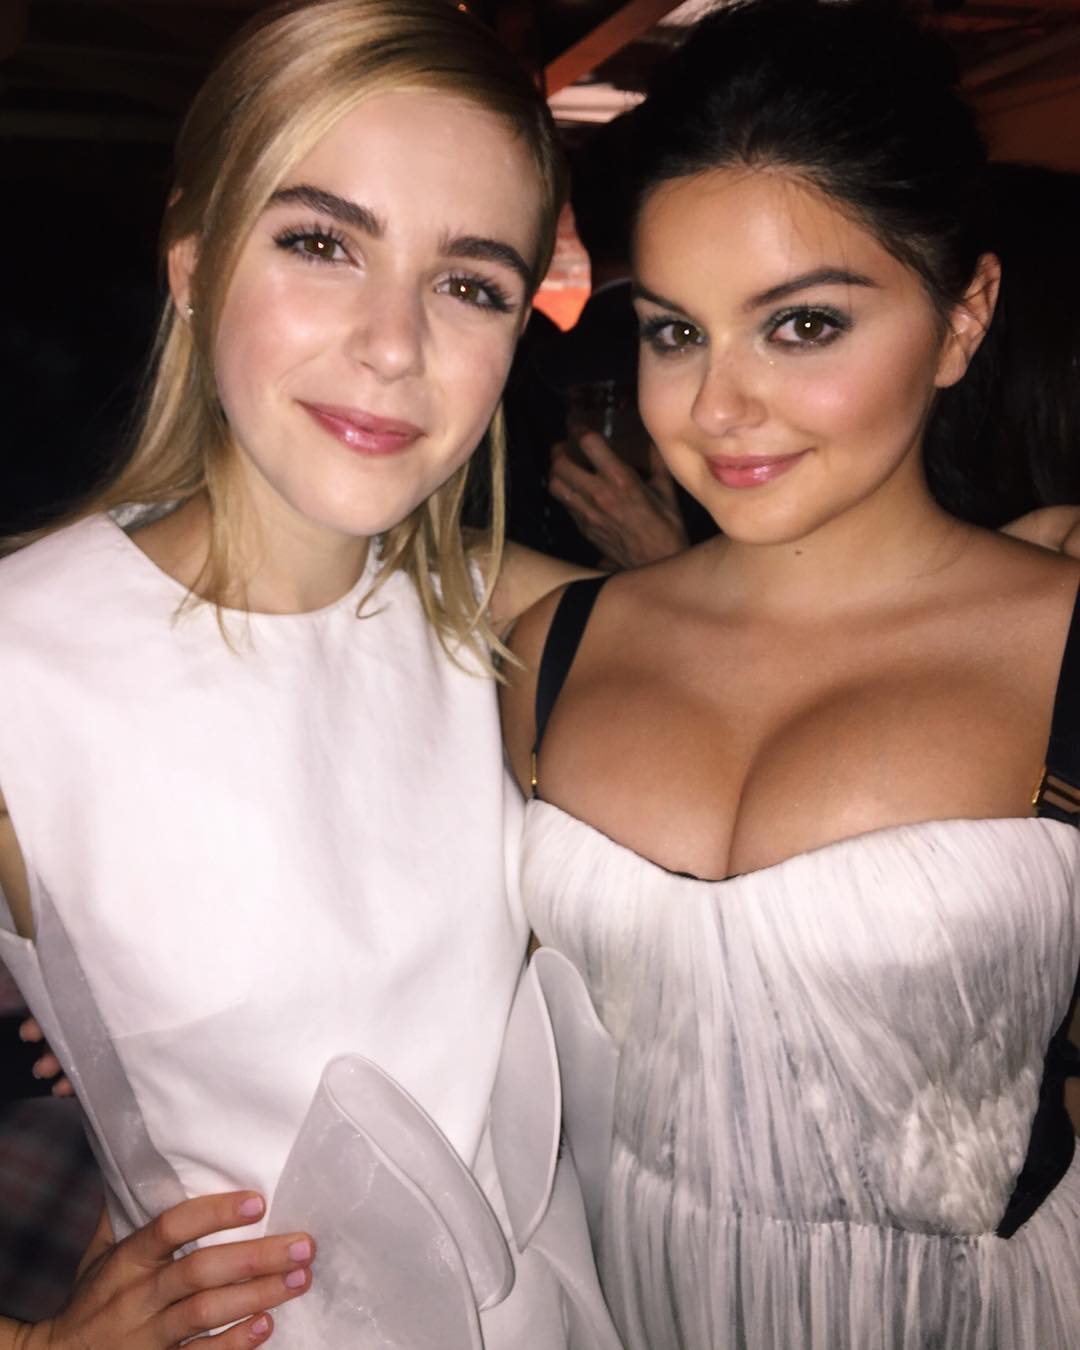 Ariel Winter Takes Her Cleavage Out To An Emmy Party